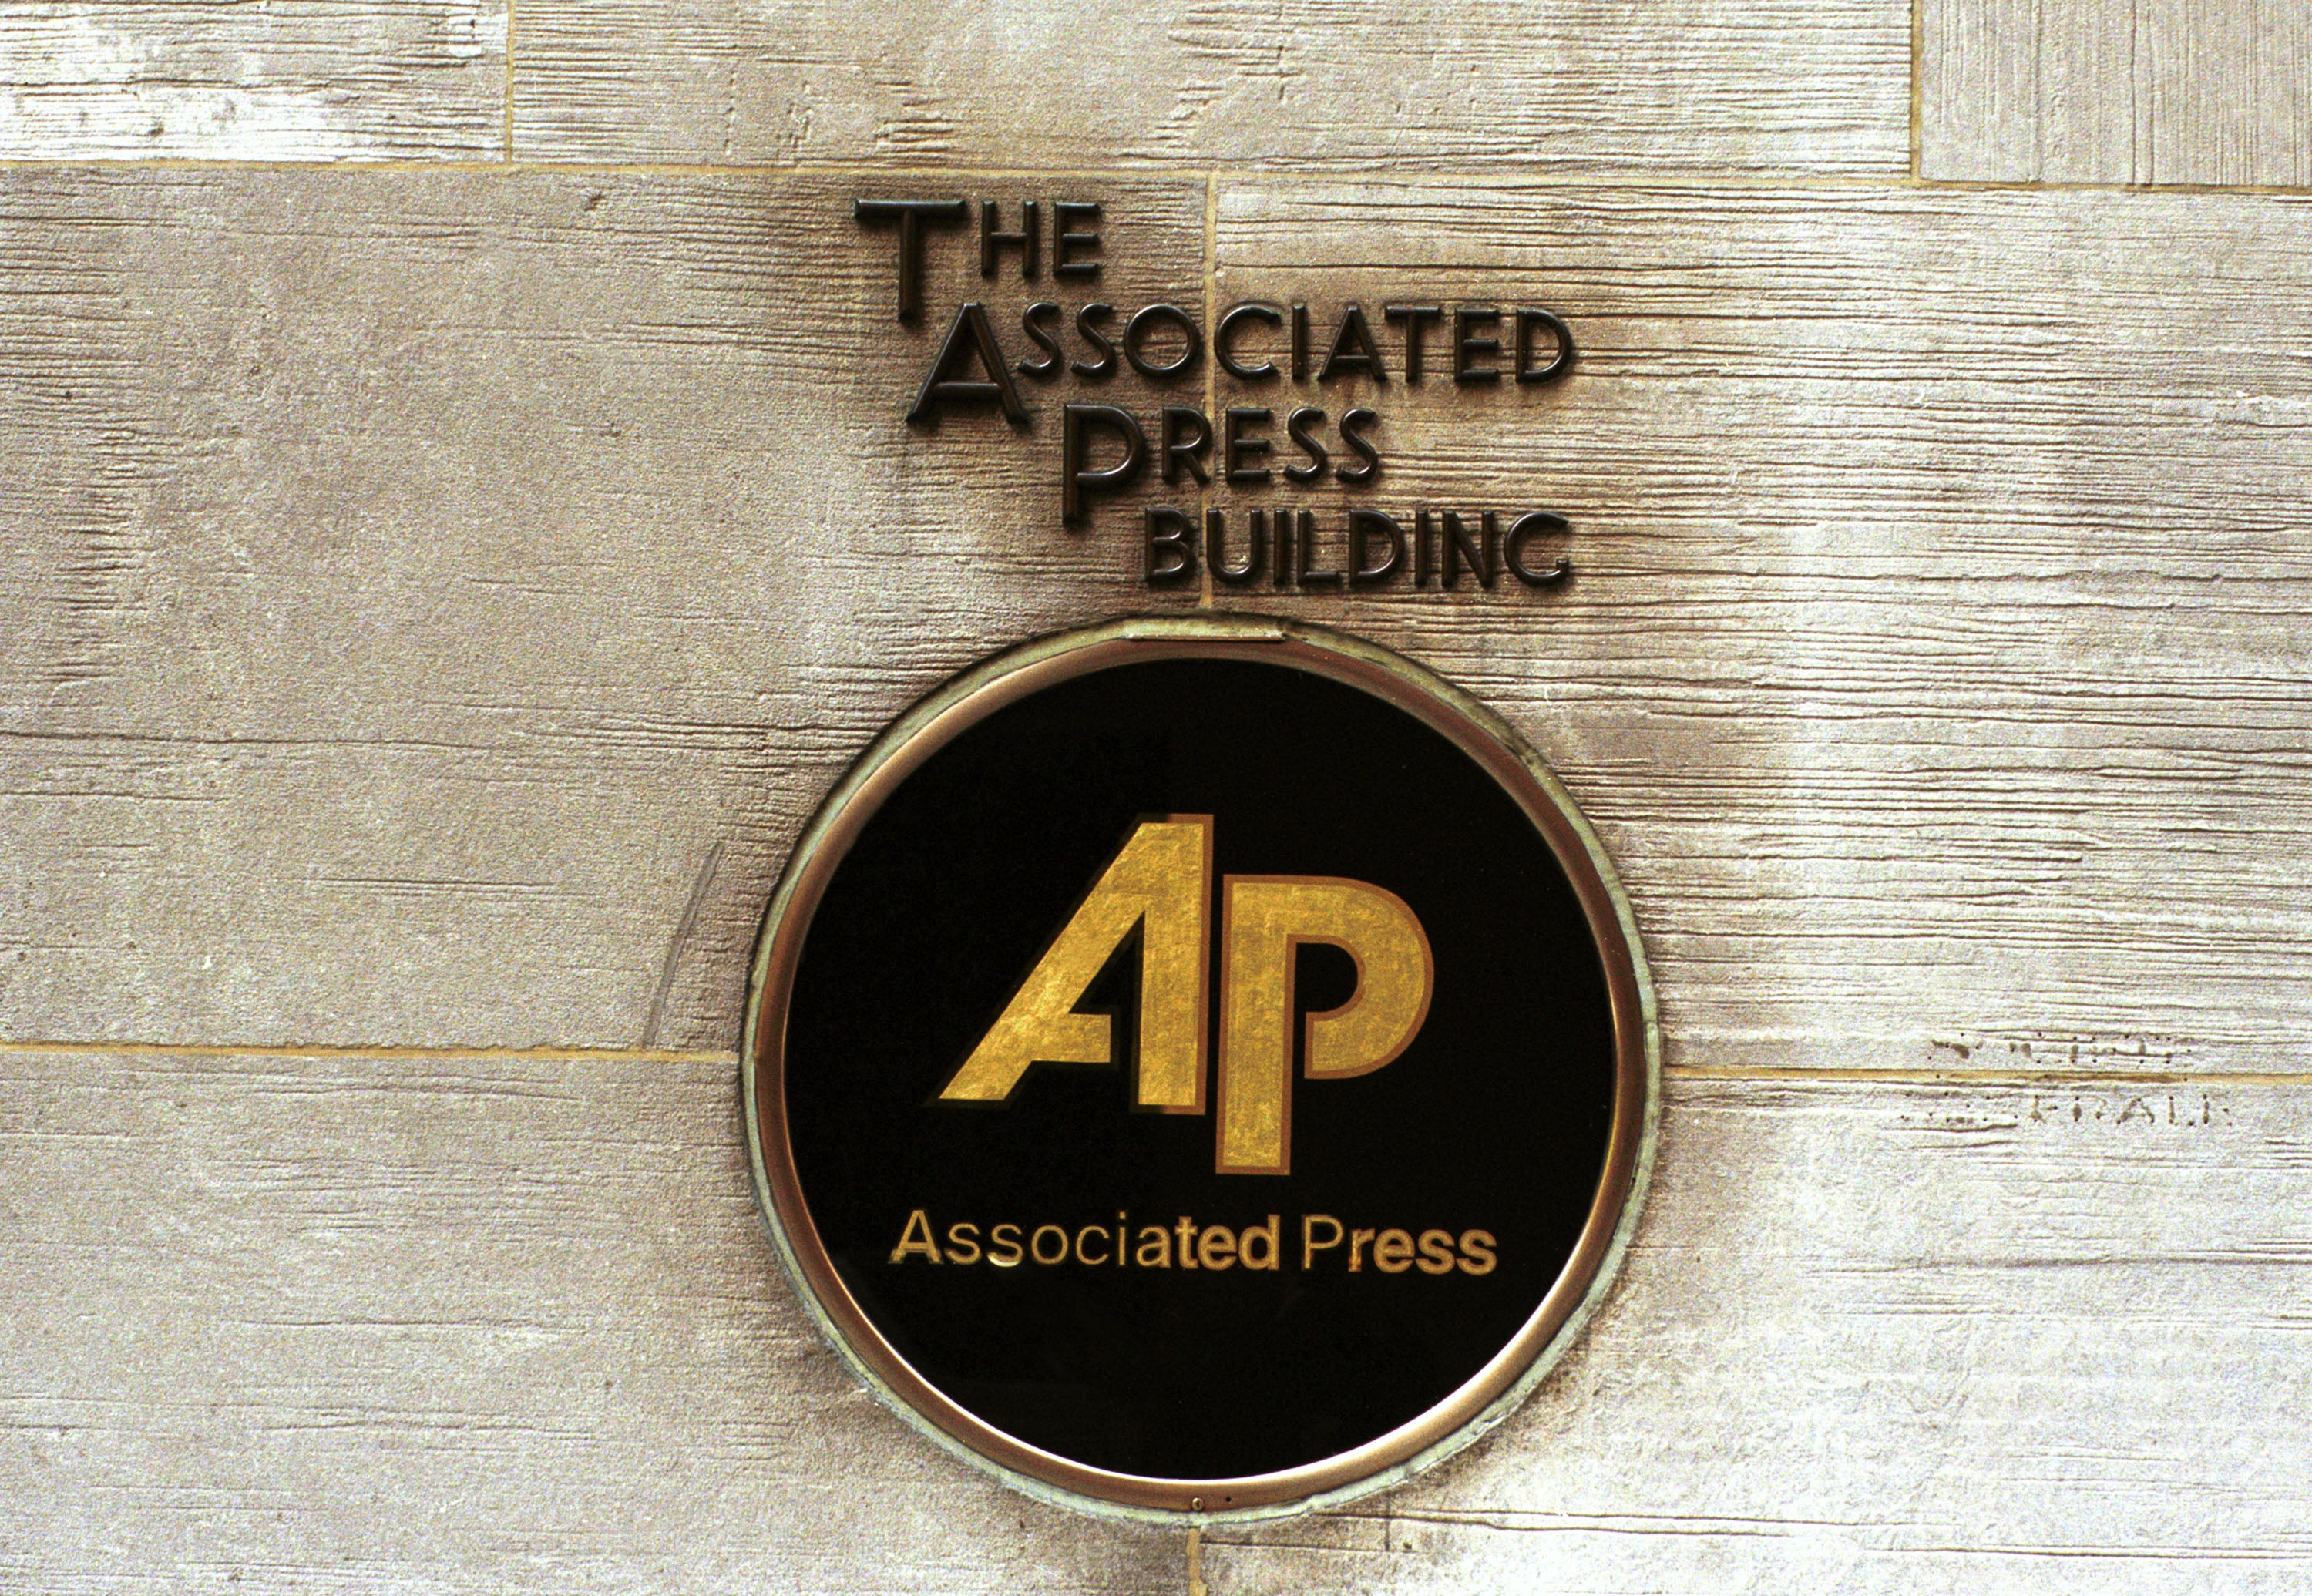 The Associated Press recently fired 22-year-old news associate Emily Wilder